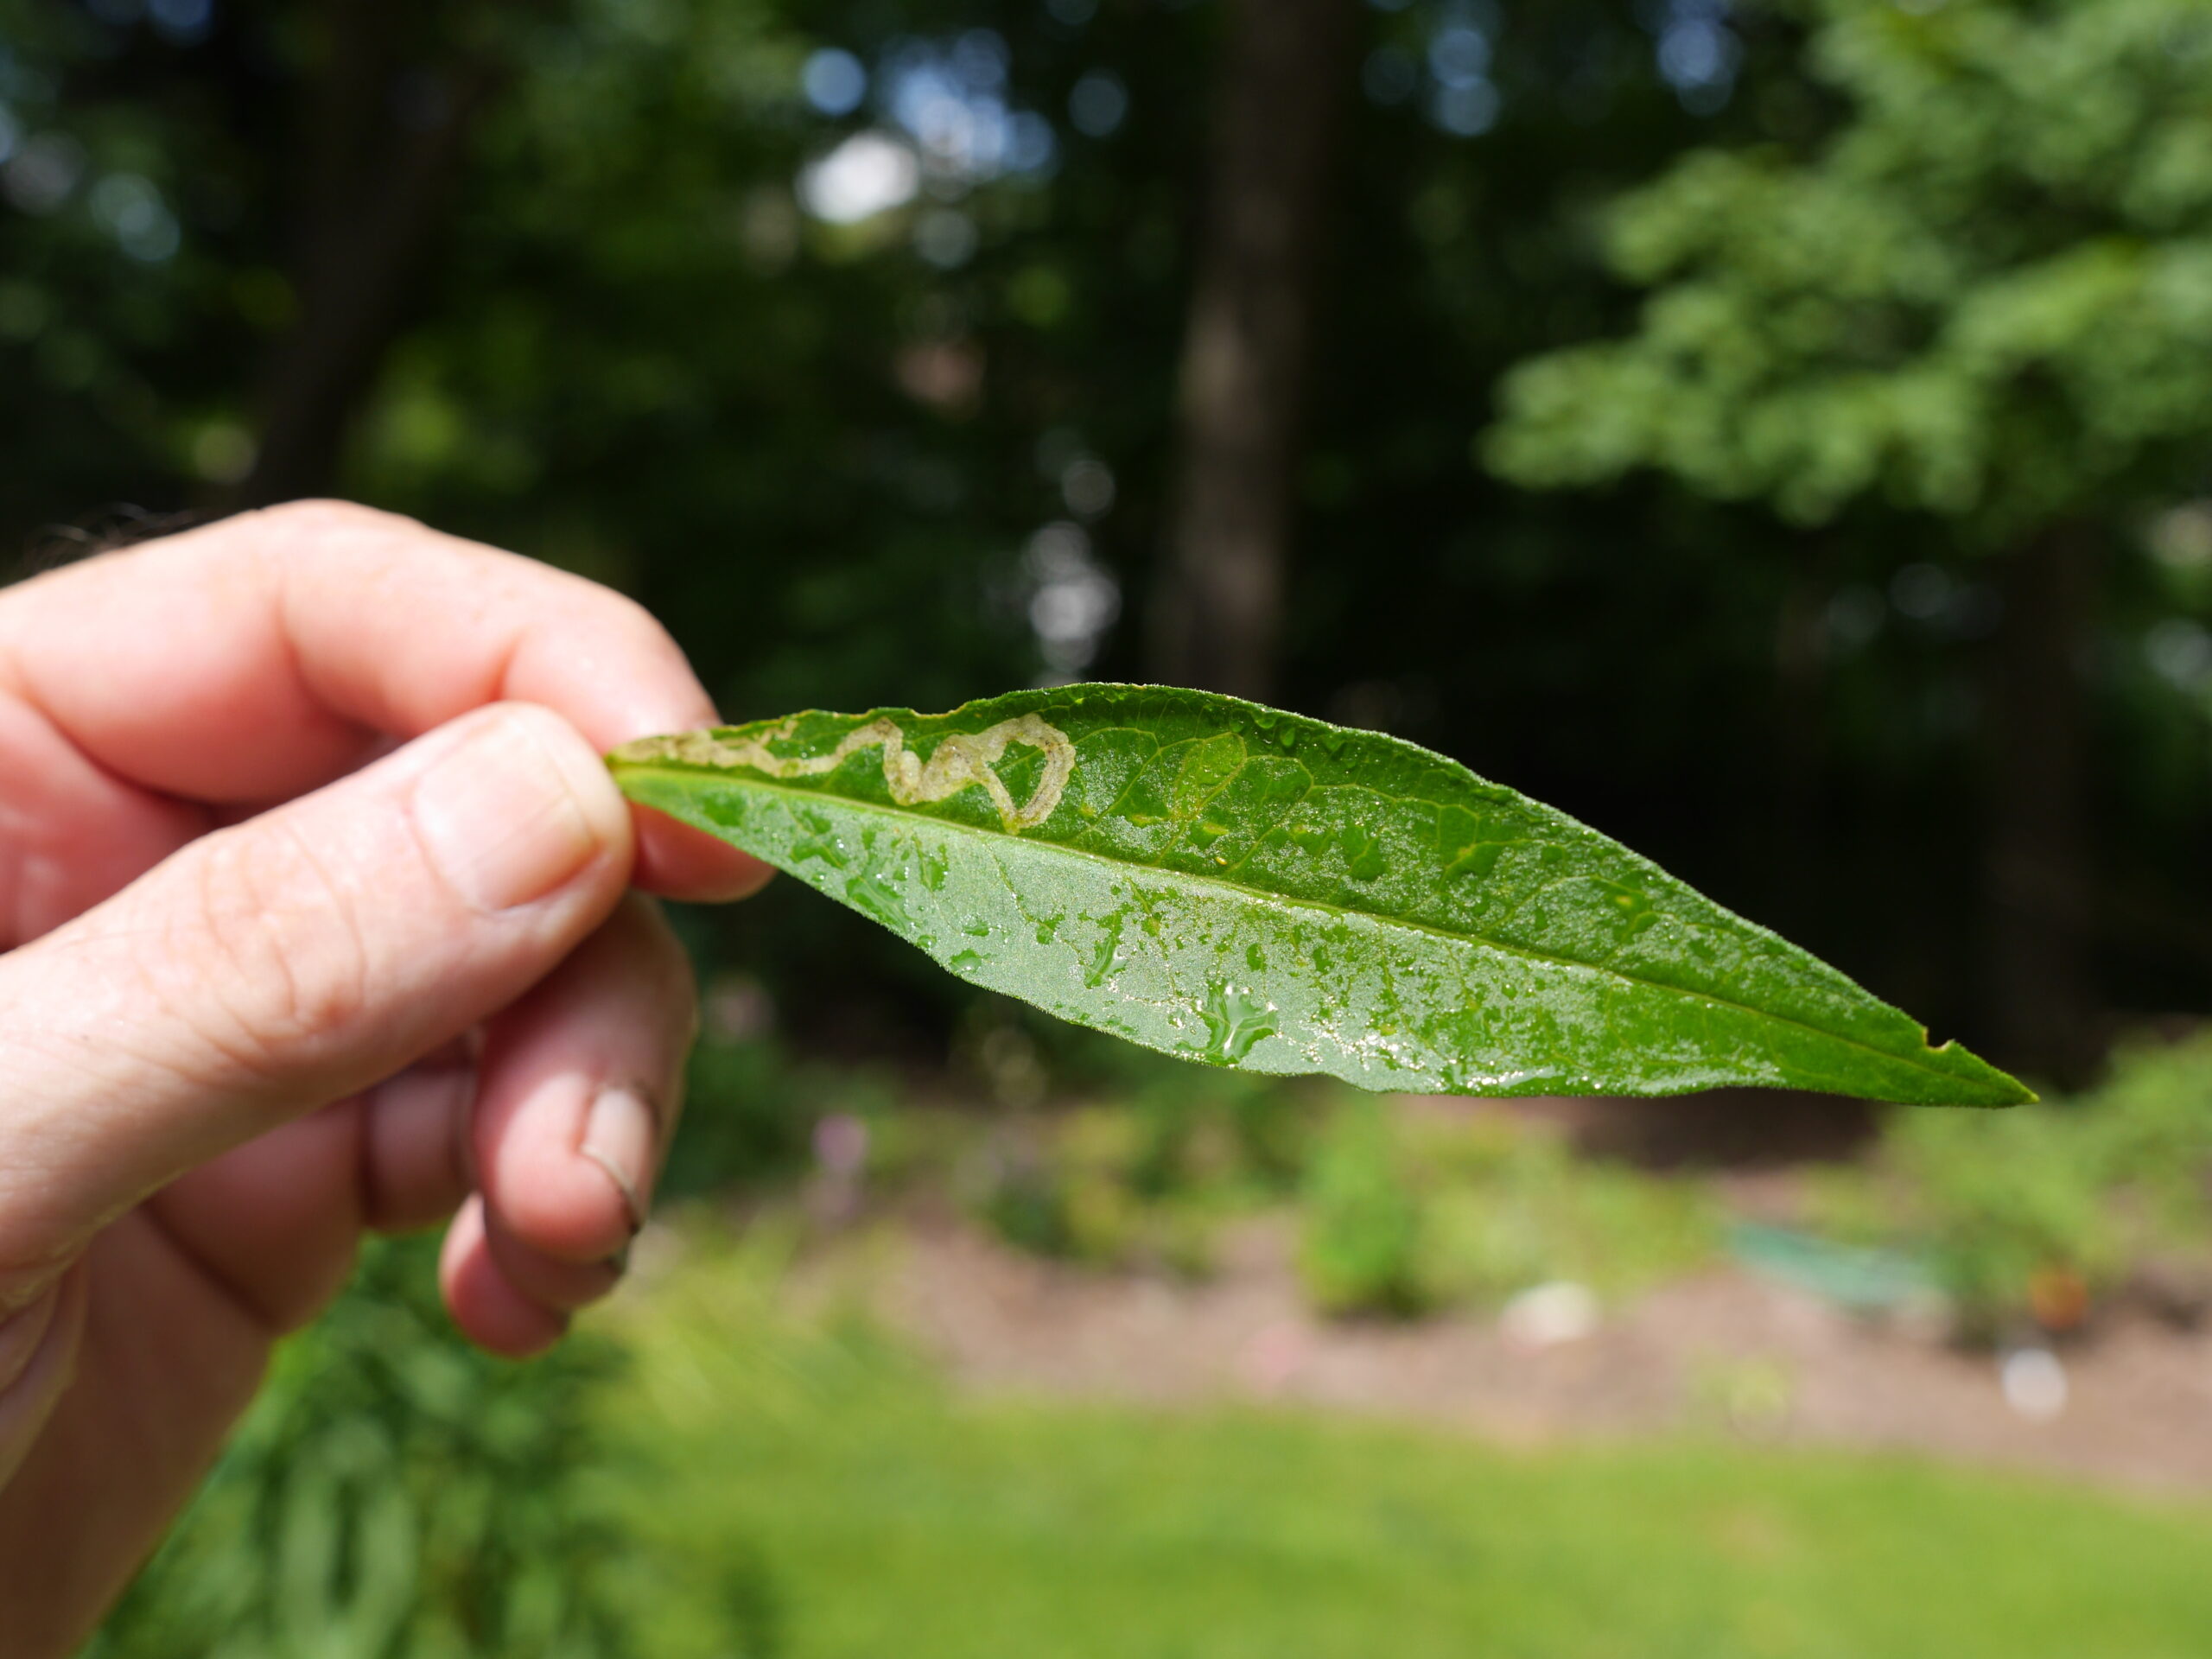 While leaf miners are often found on the leaves of columbines this is a Phlox leaf miner trail. Leaf miners (except on birch trees) are usually a nuisance and not treated though neem oil will deter them. ANDREW MESSINGER